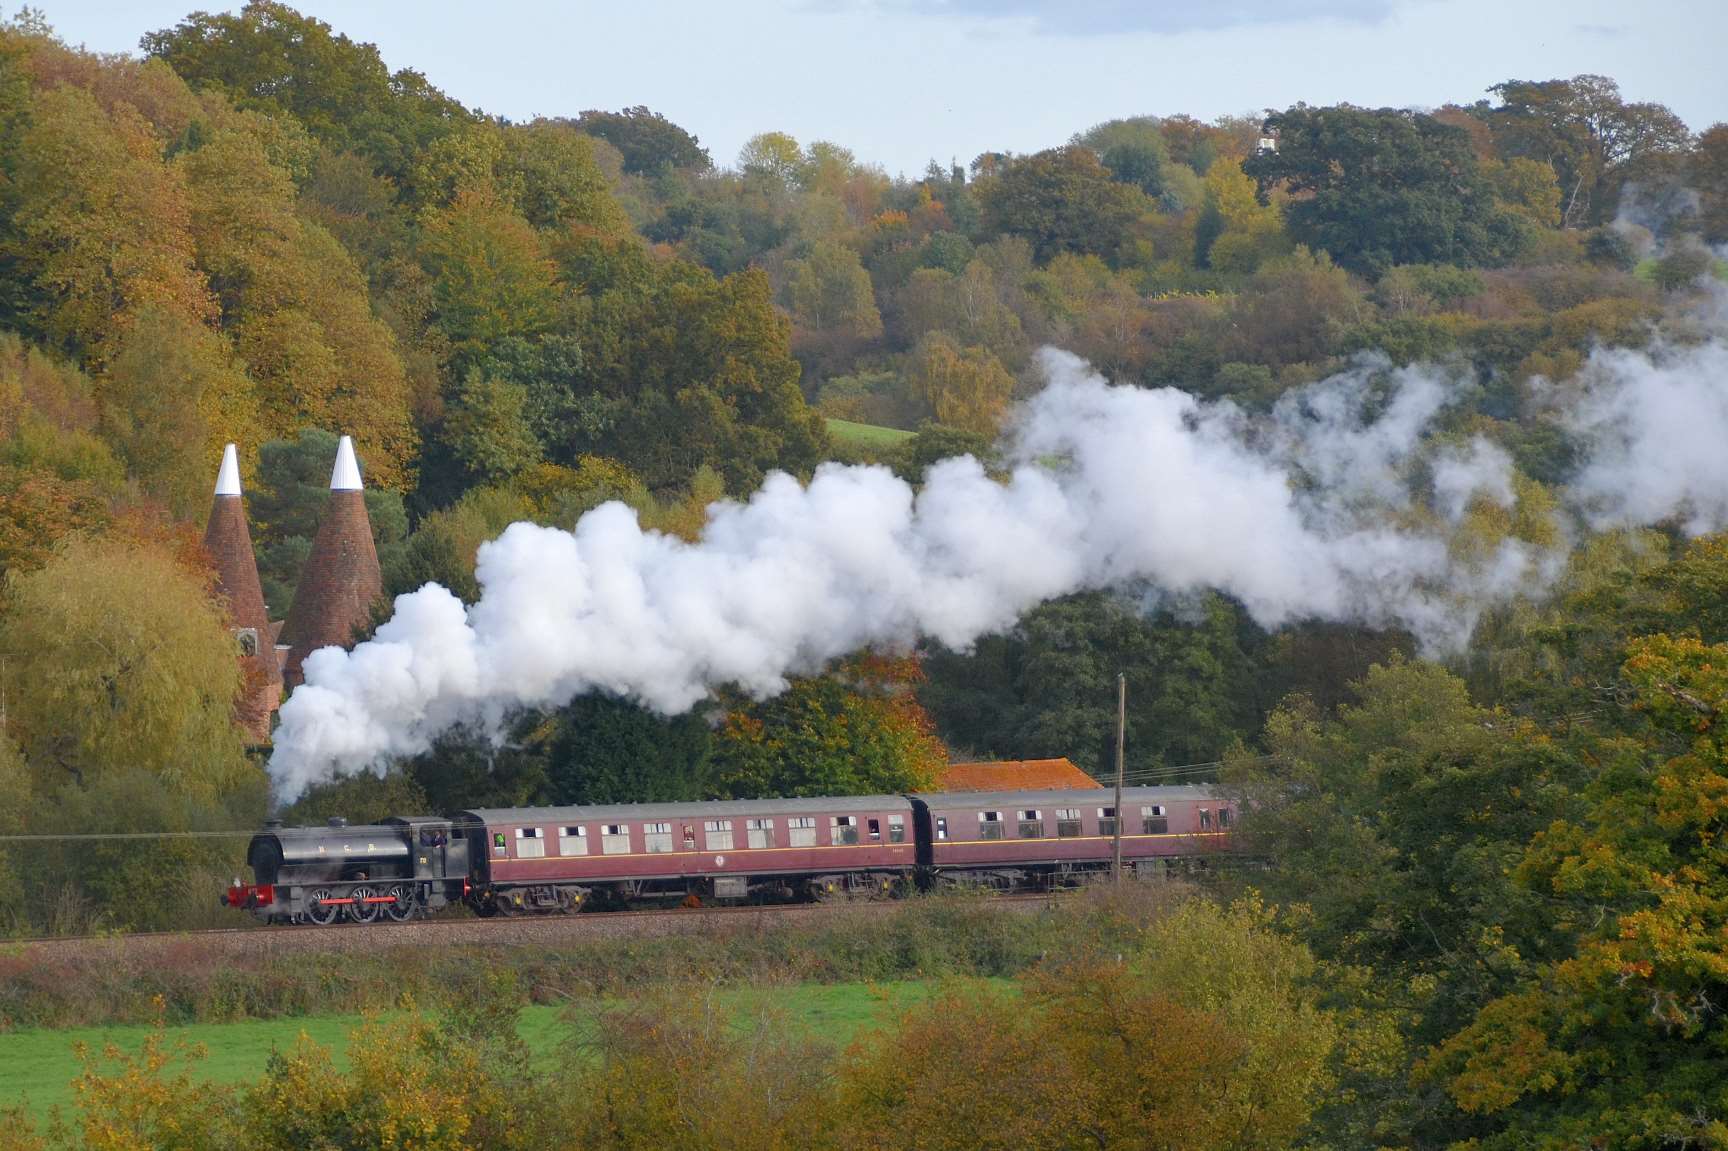 The Spa Valley Railway